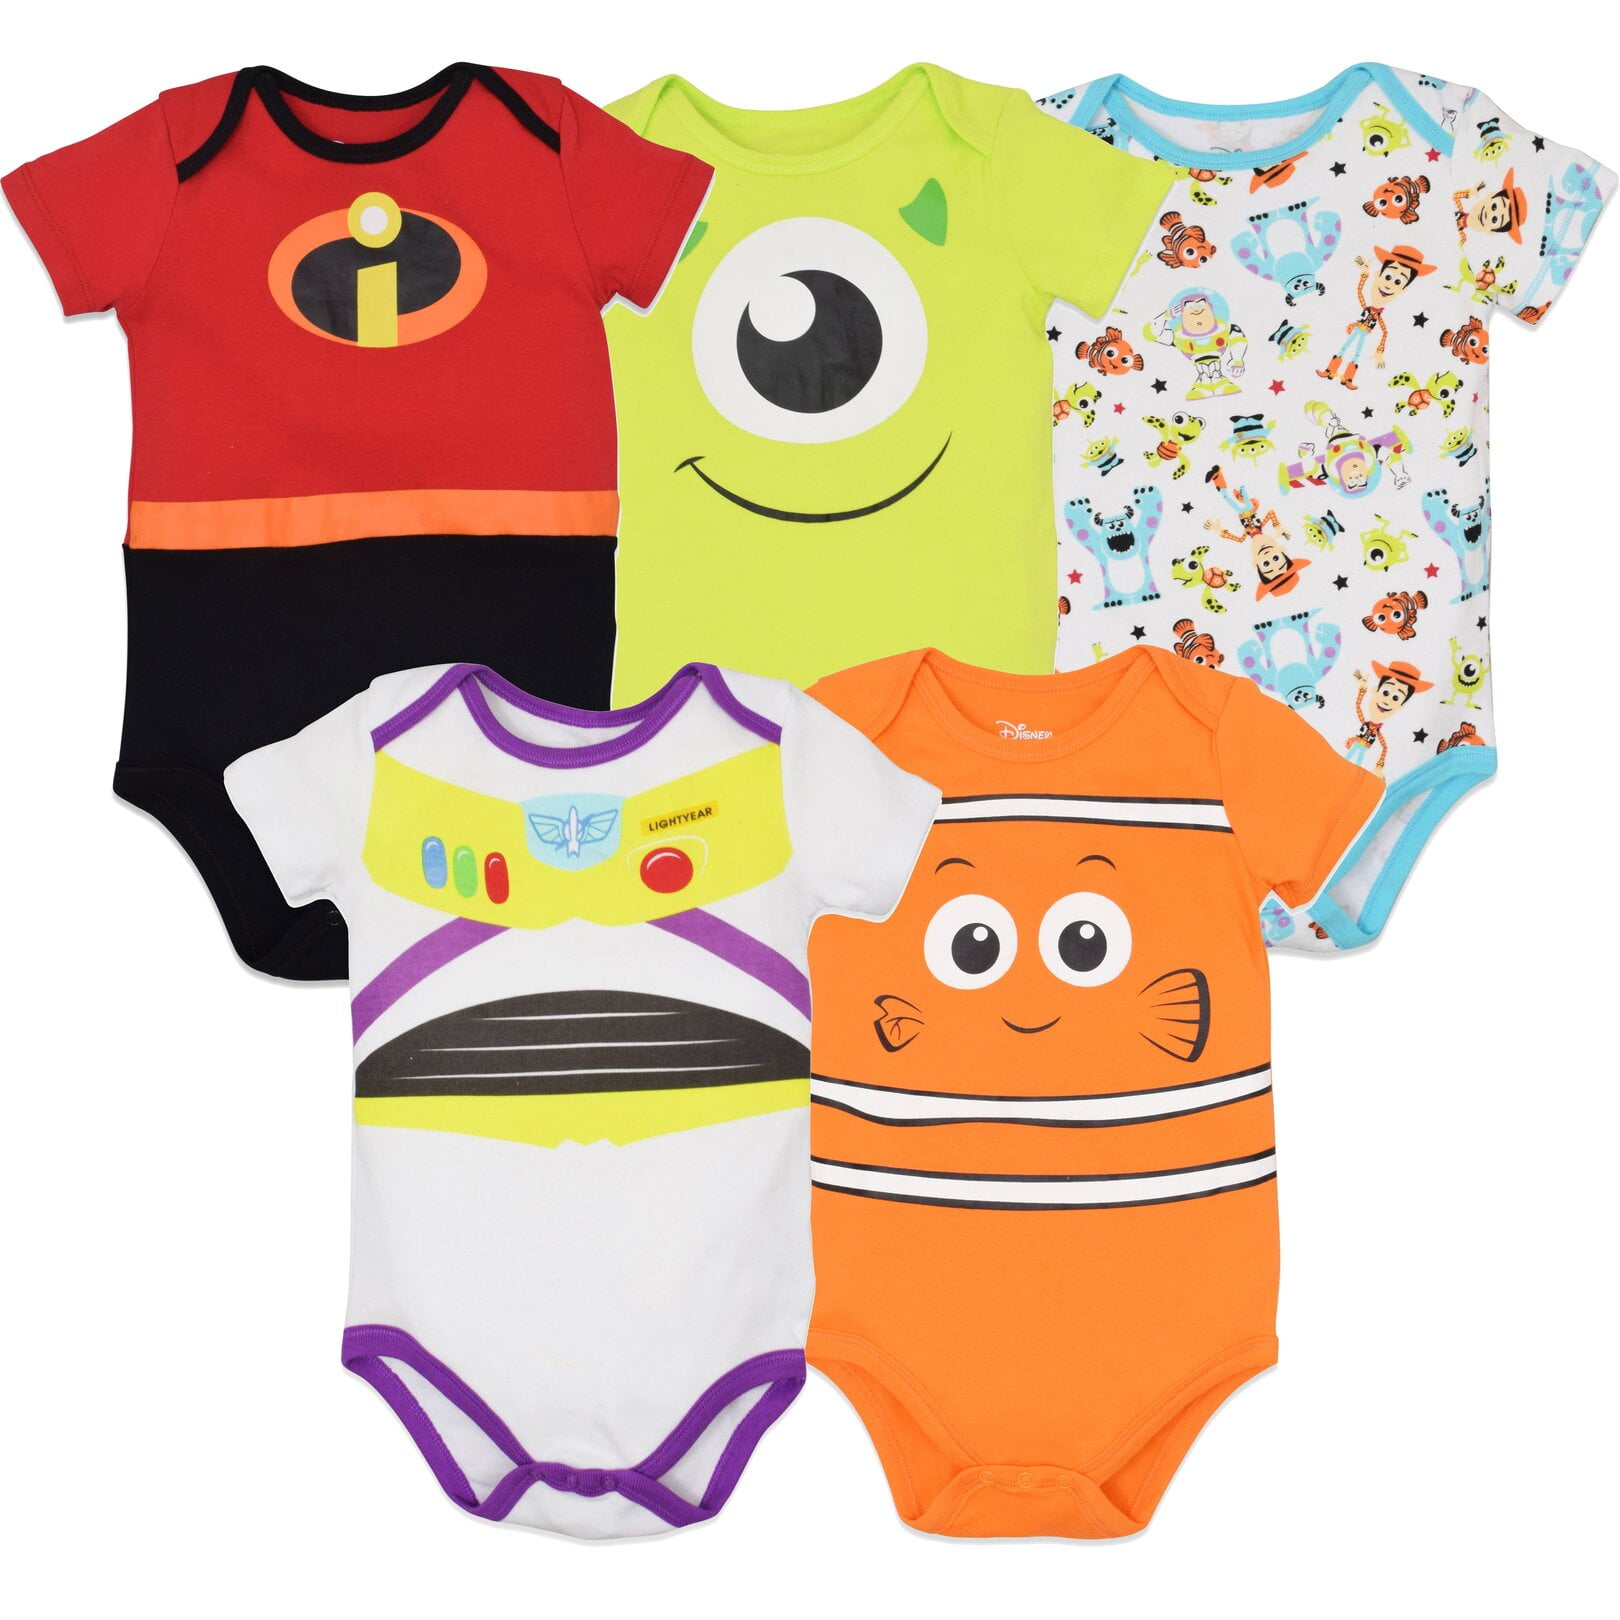 Totsy Baby Clothes & Accessories - CafePress